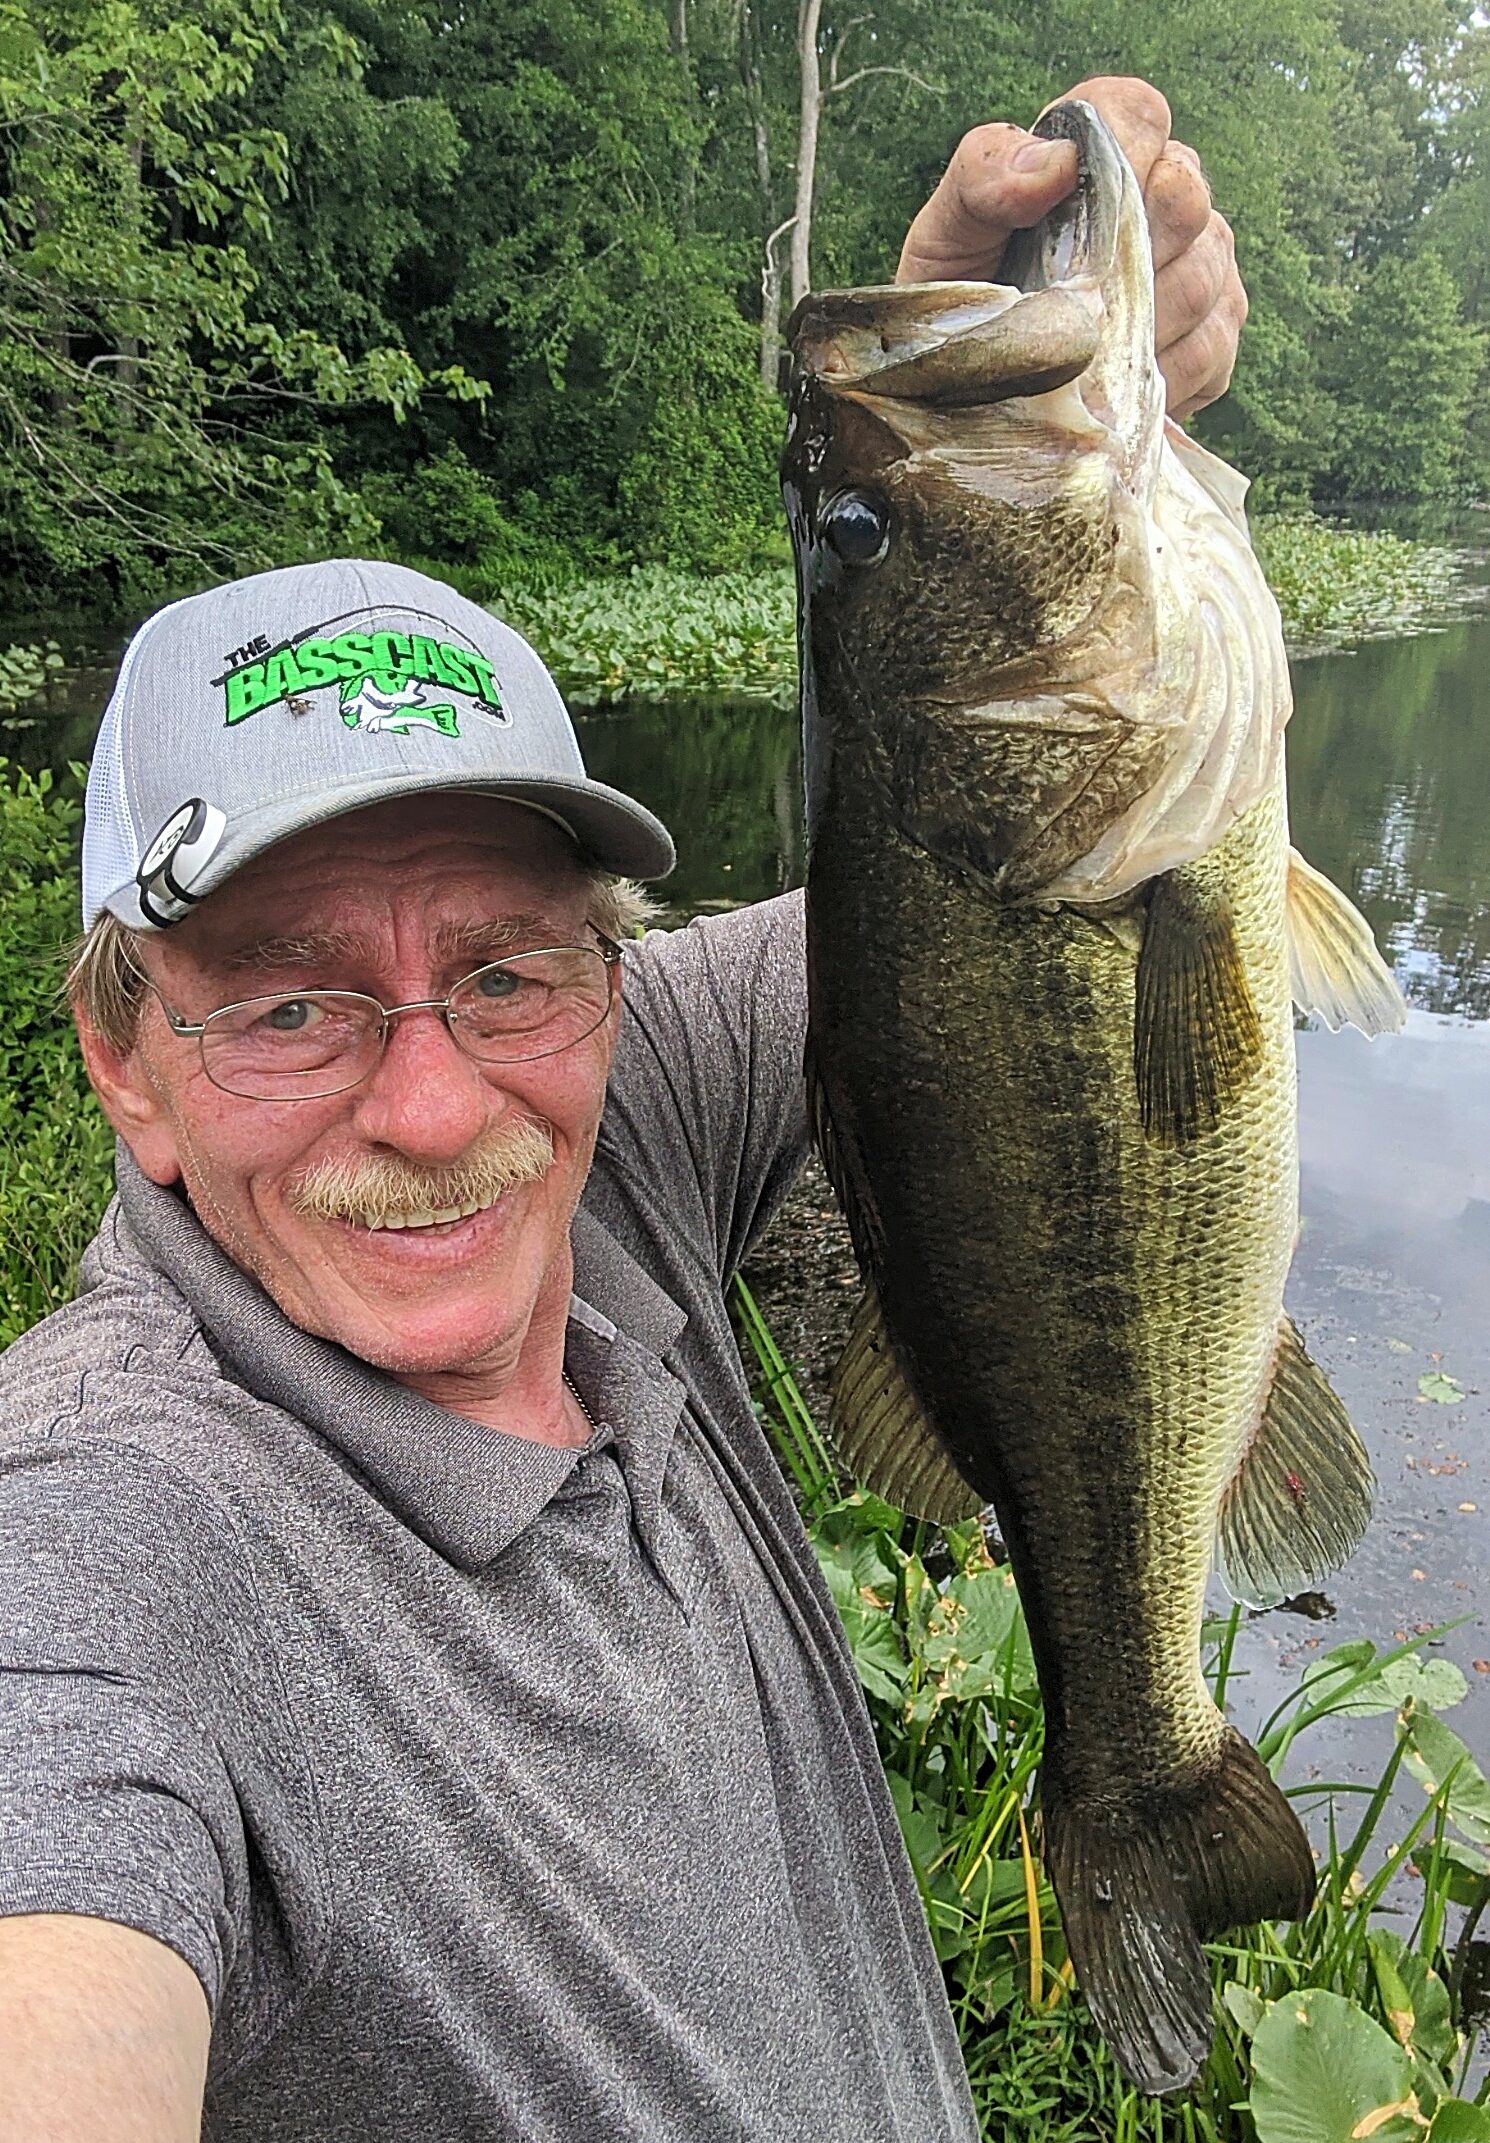 Bladed Jig catches BIG BASS 